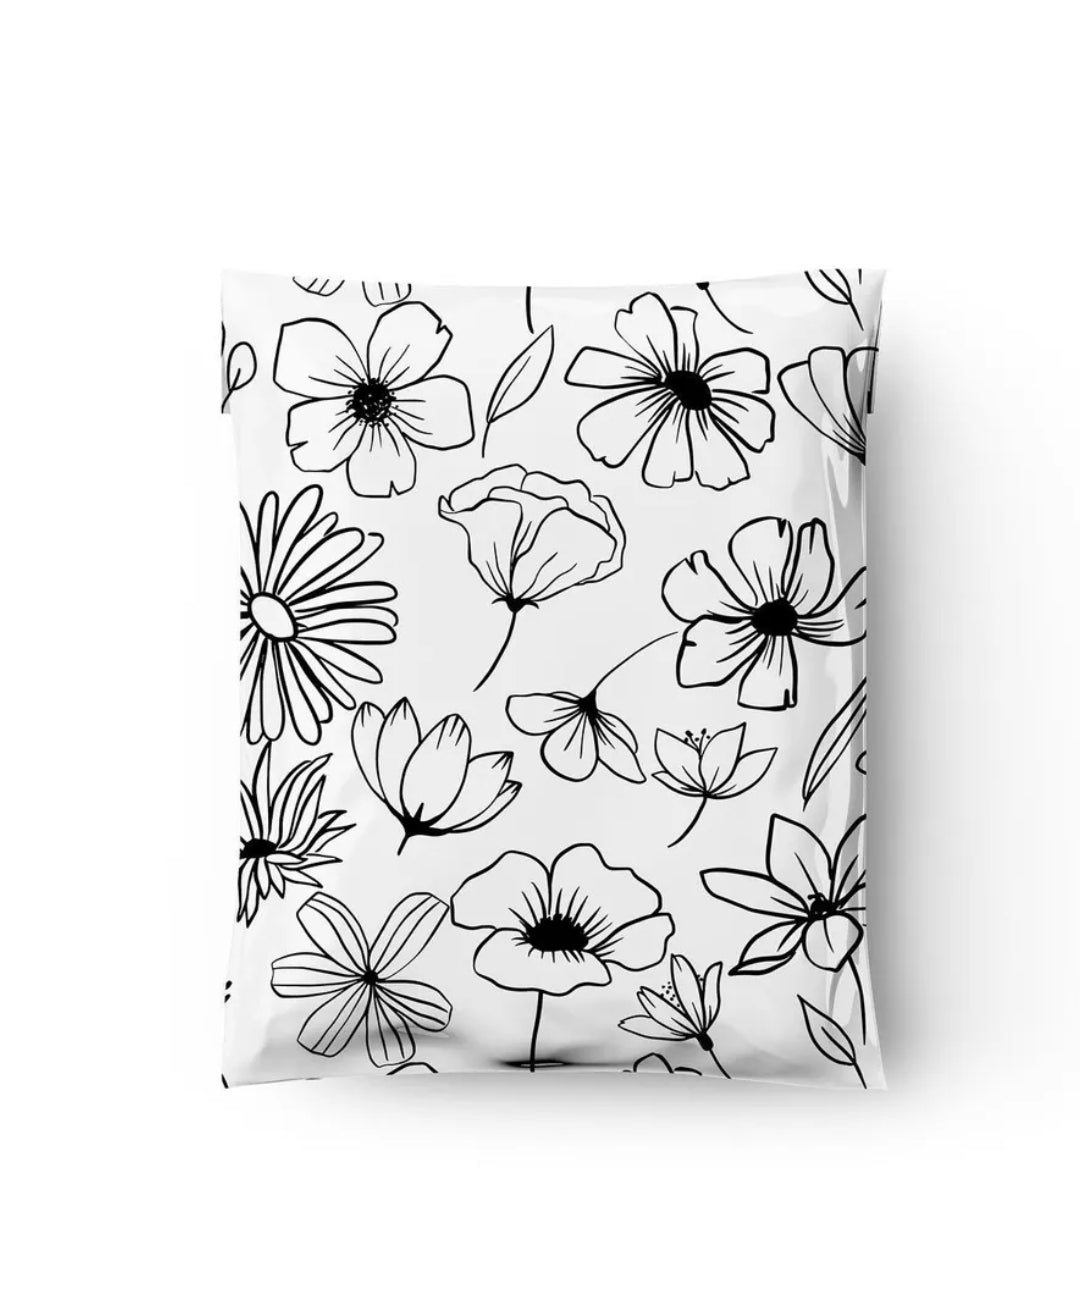 Black and White Sketched Floral  10x13in